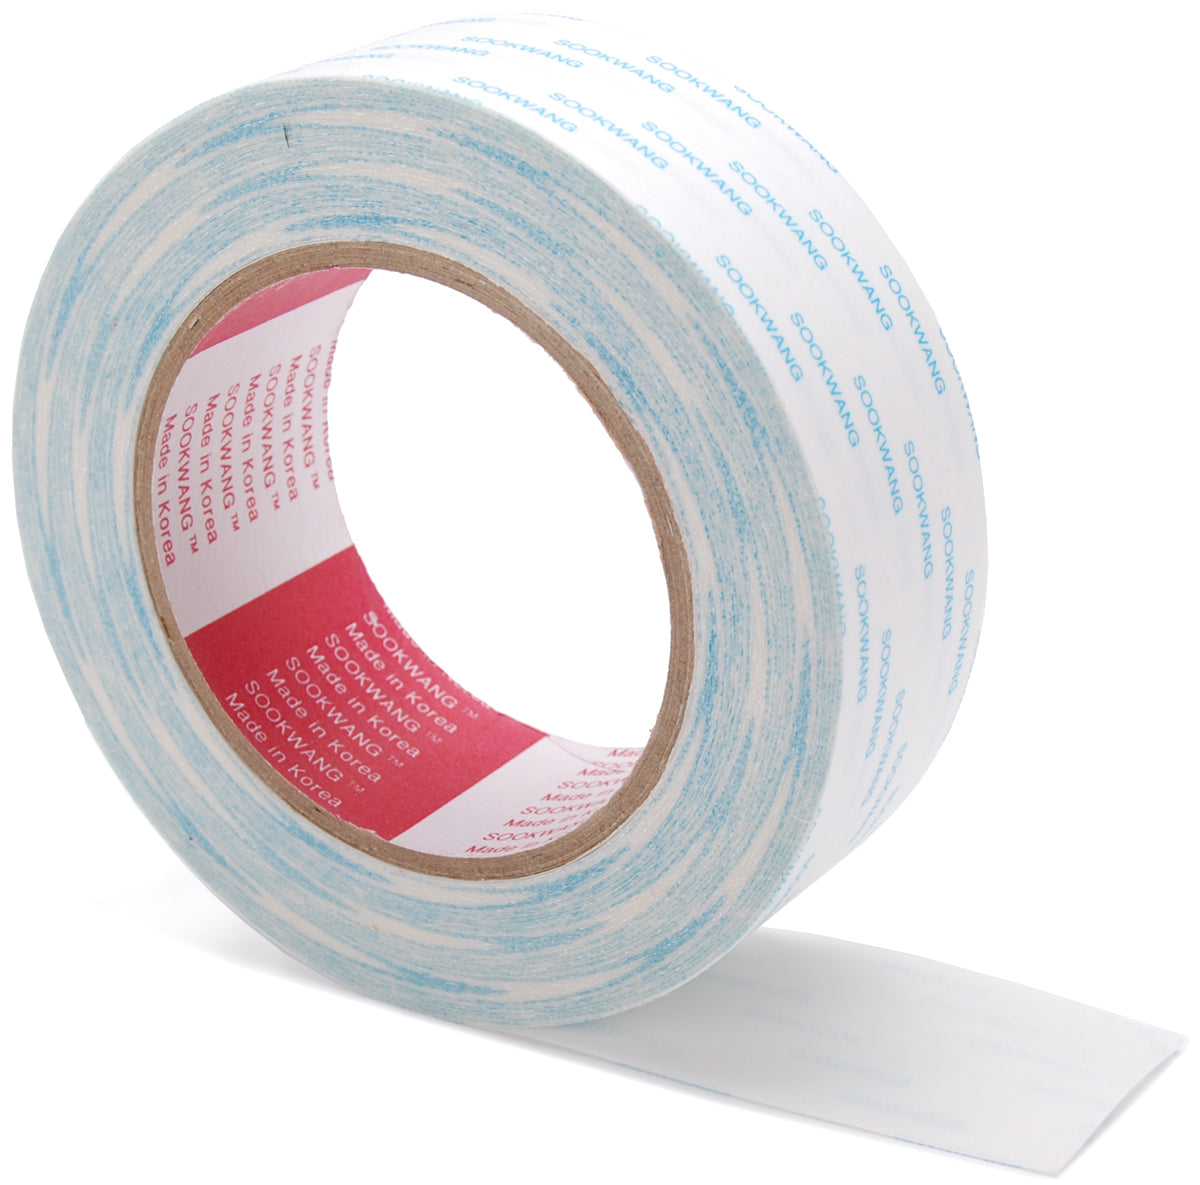 Scor-Tape Double Sided Adhesive 1.5 inch X 27yd 1.5"